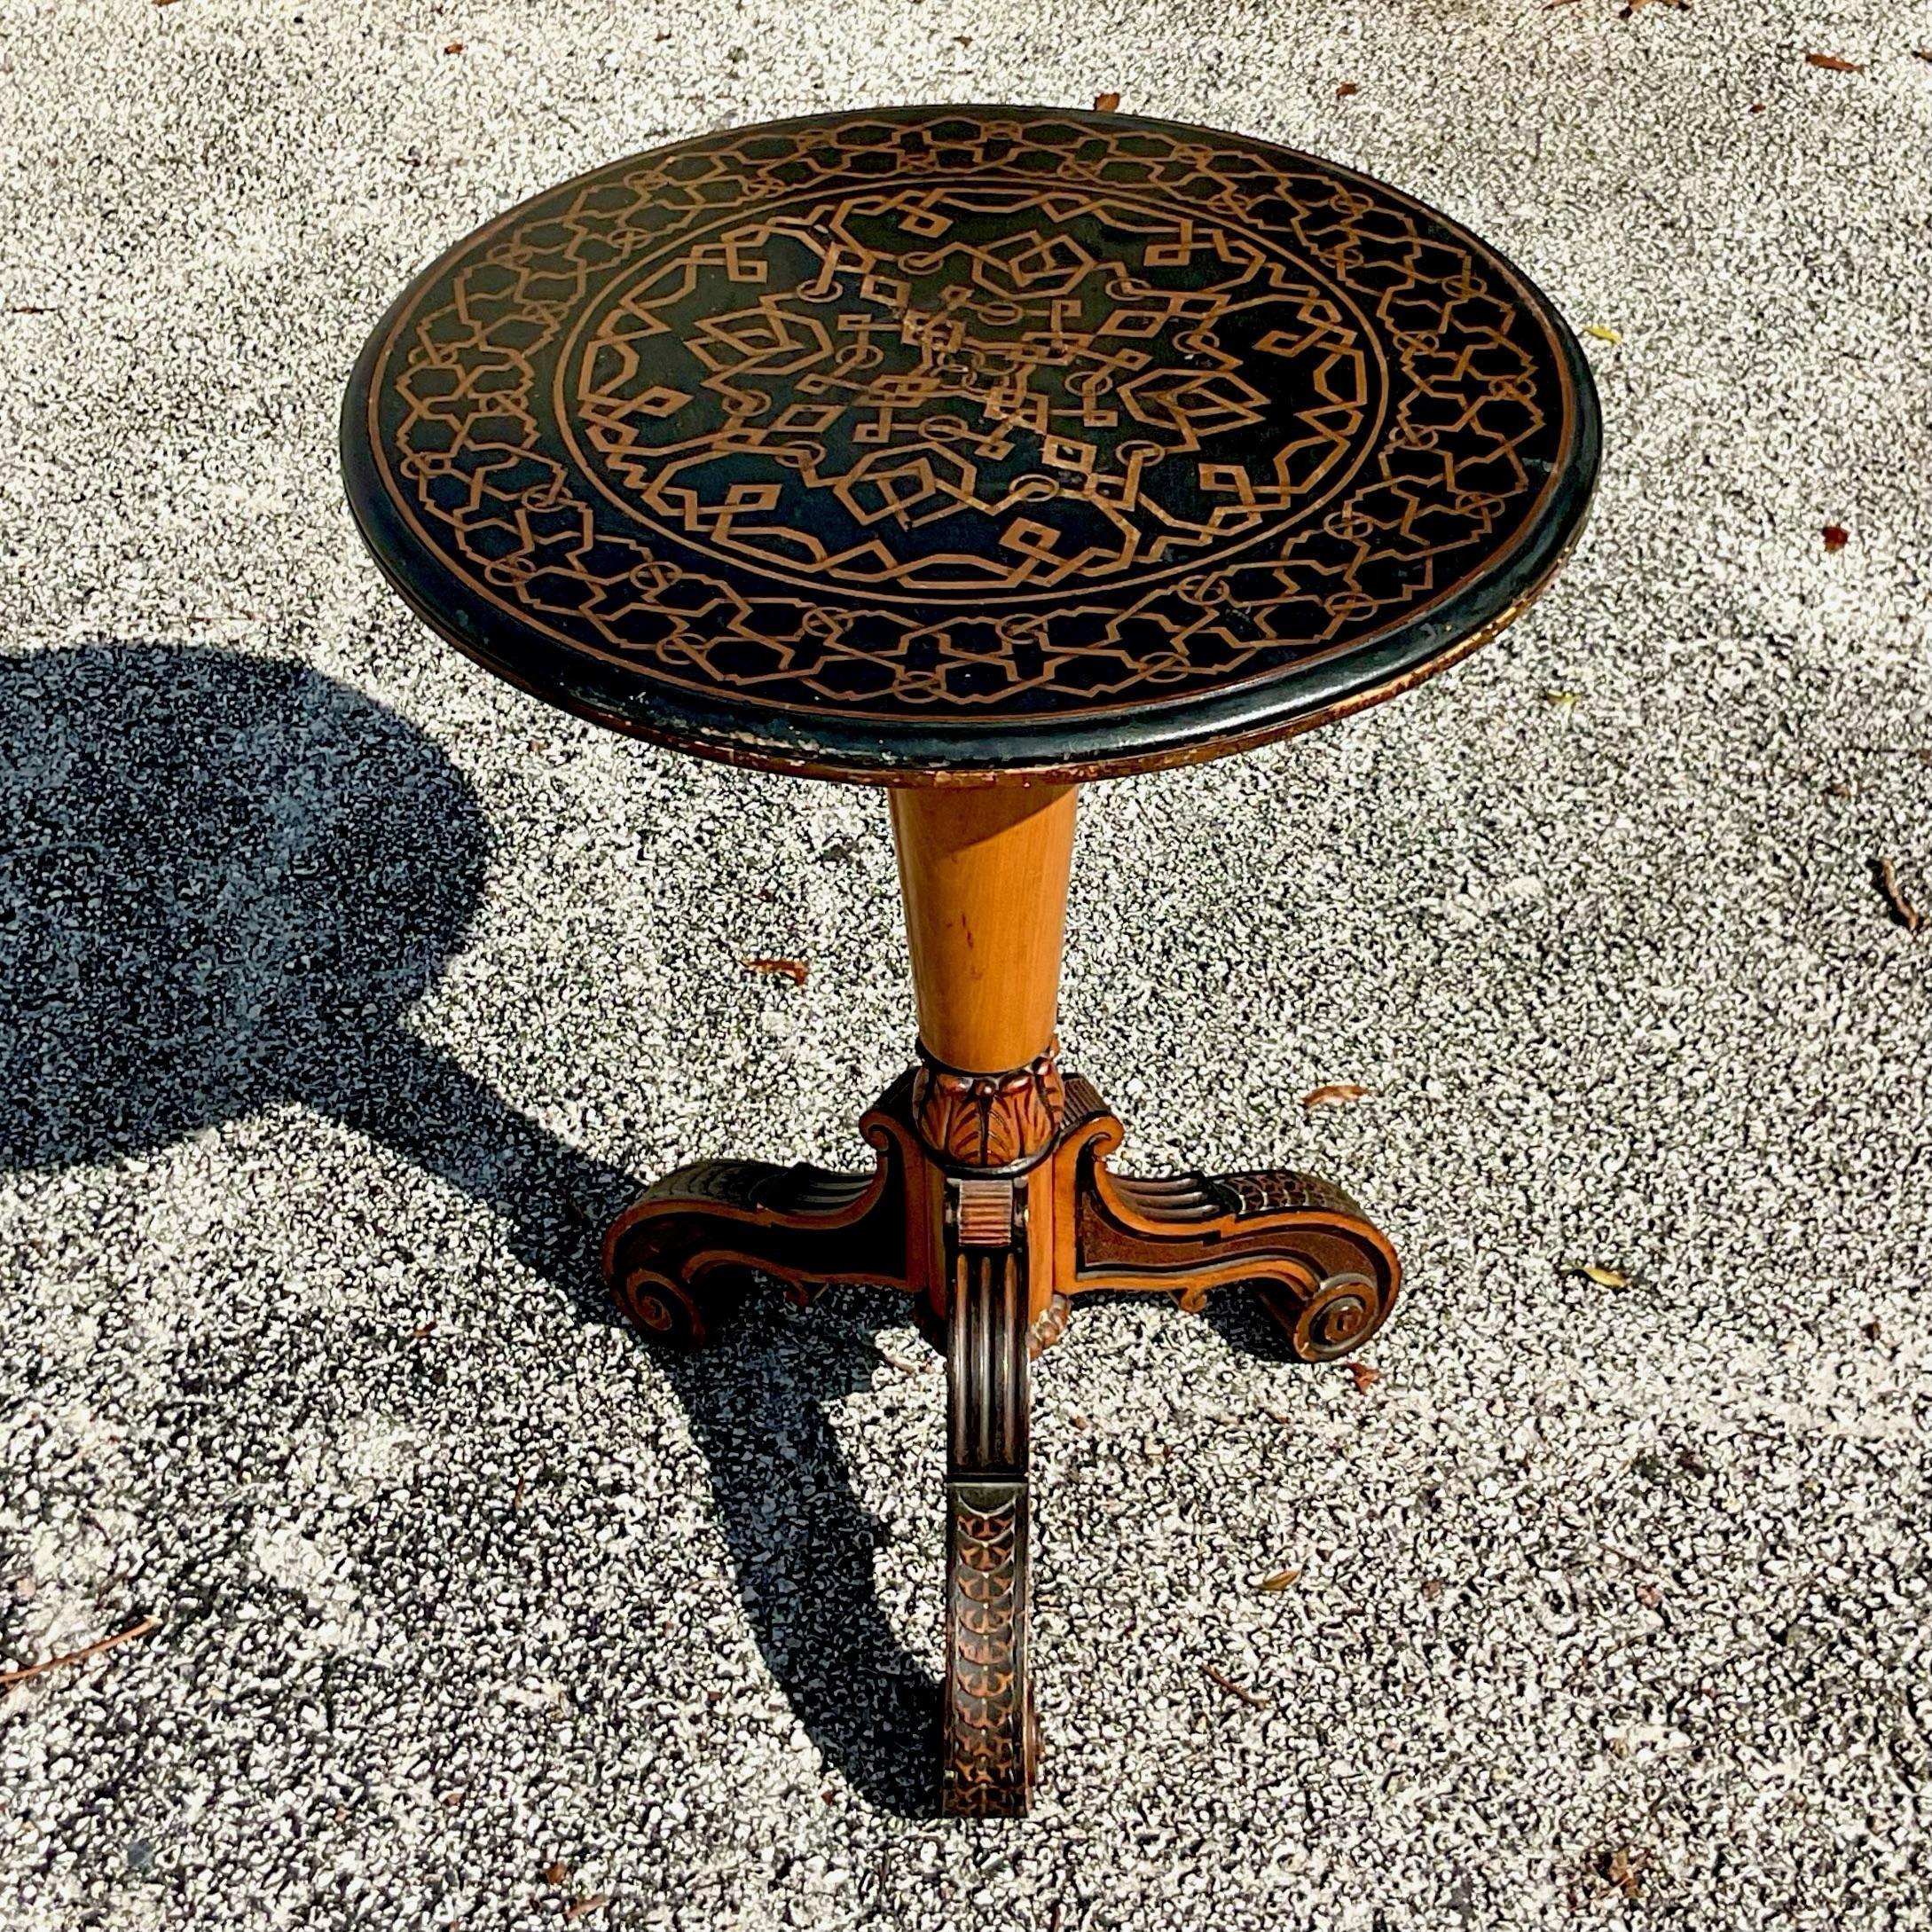 Exquisite antique drop top side table with intricate inlay work on the table top and detailed carvings on the pedestal. The side table is a statement piece for any room adding an element of old world craftsmanship with modern day beauty. The piece